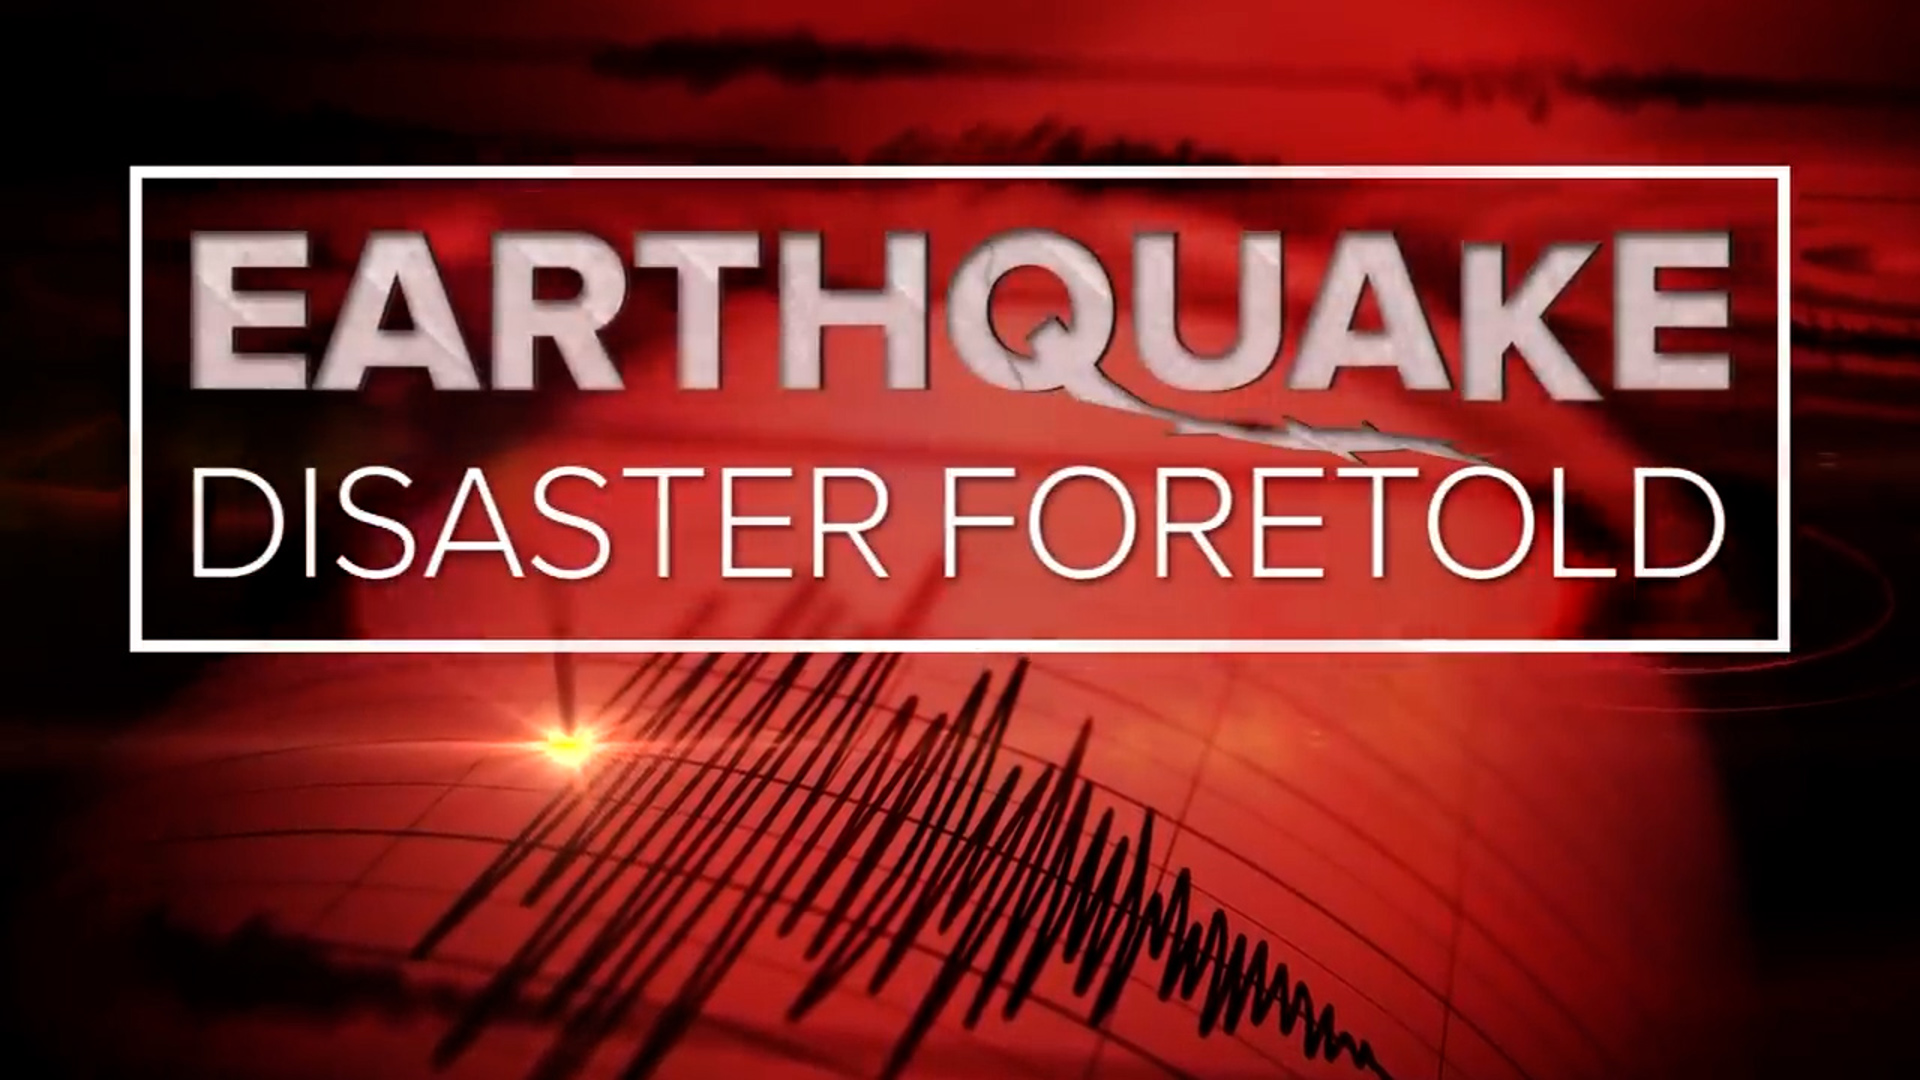 A KING 5 special presentation spotlights the major earthquake threats facing the Pacific Northwest and what residents can do to prepare.